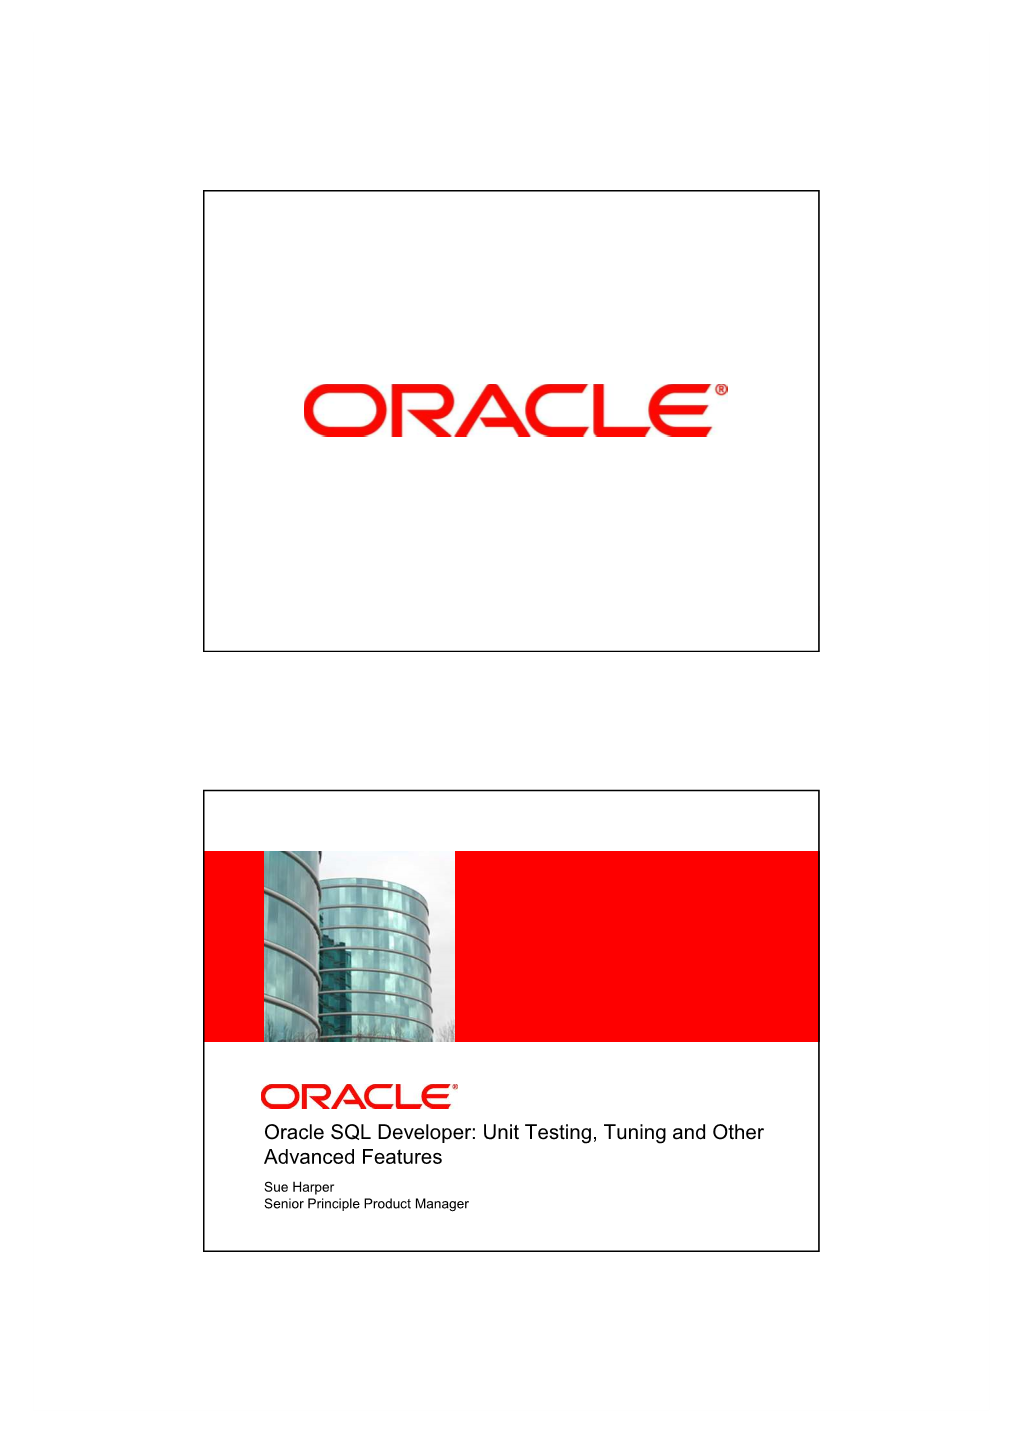 Oracle SQL Developer: Unit Testing, Tuning and Other Advanced Features